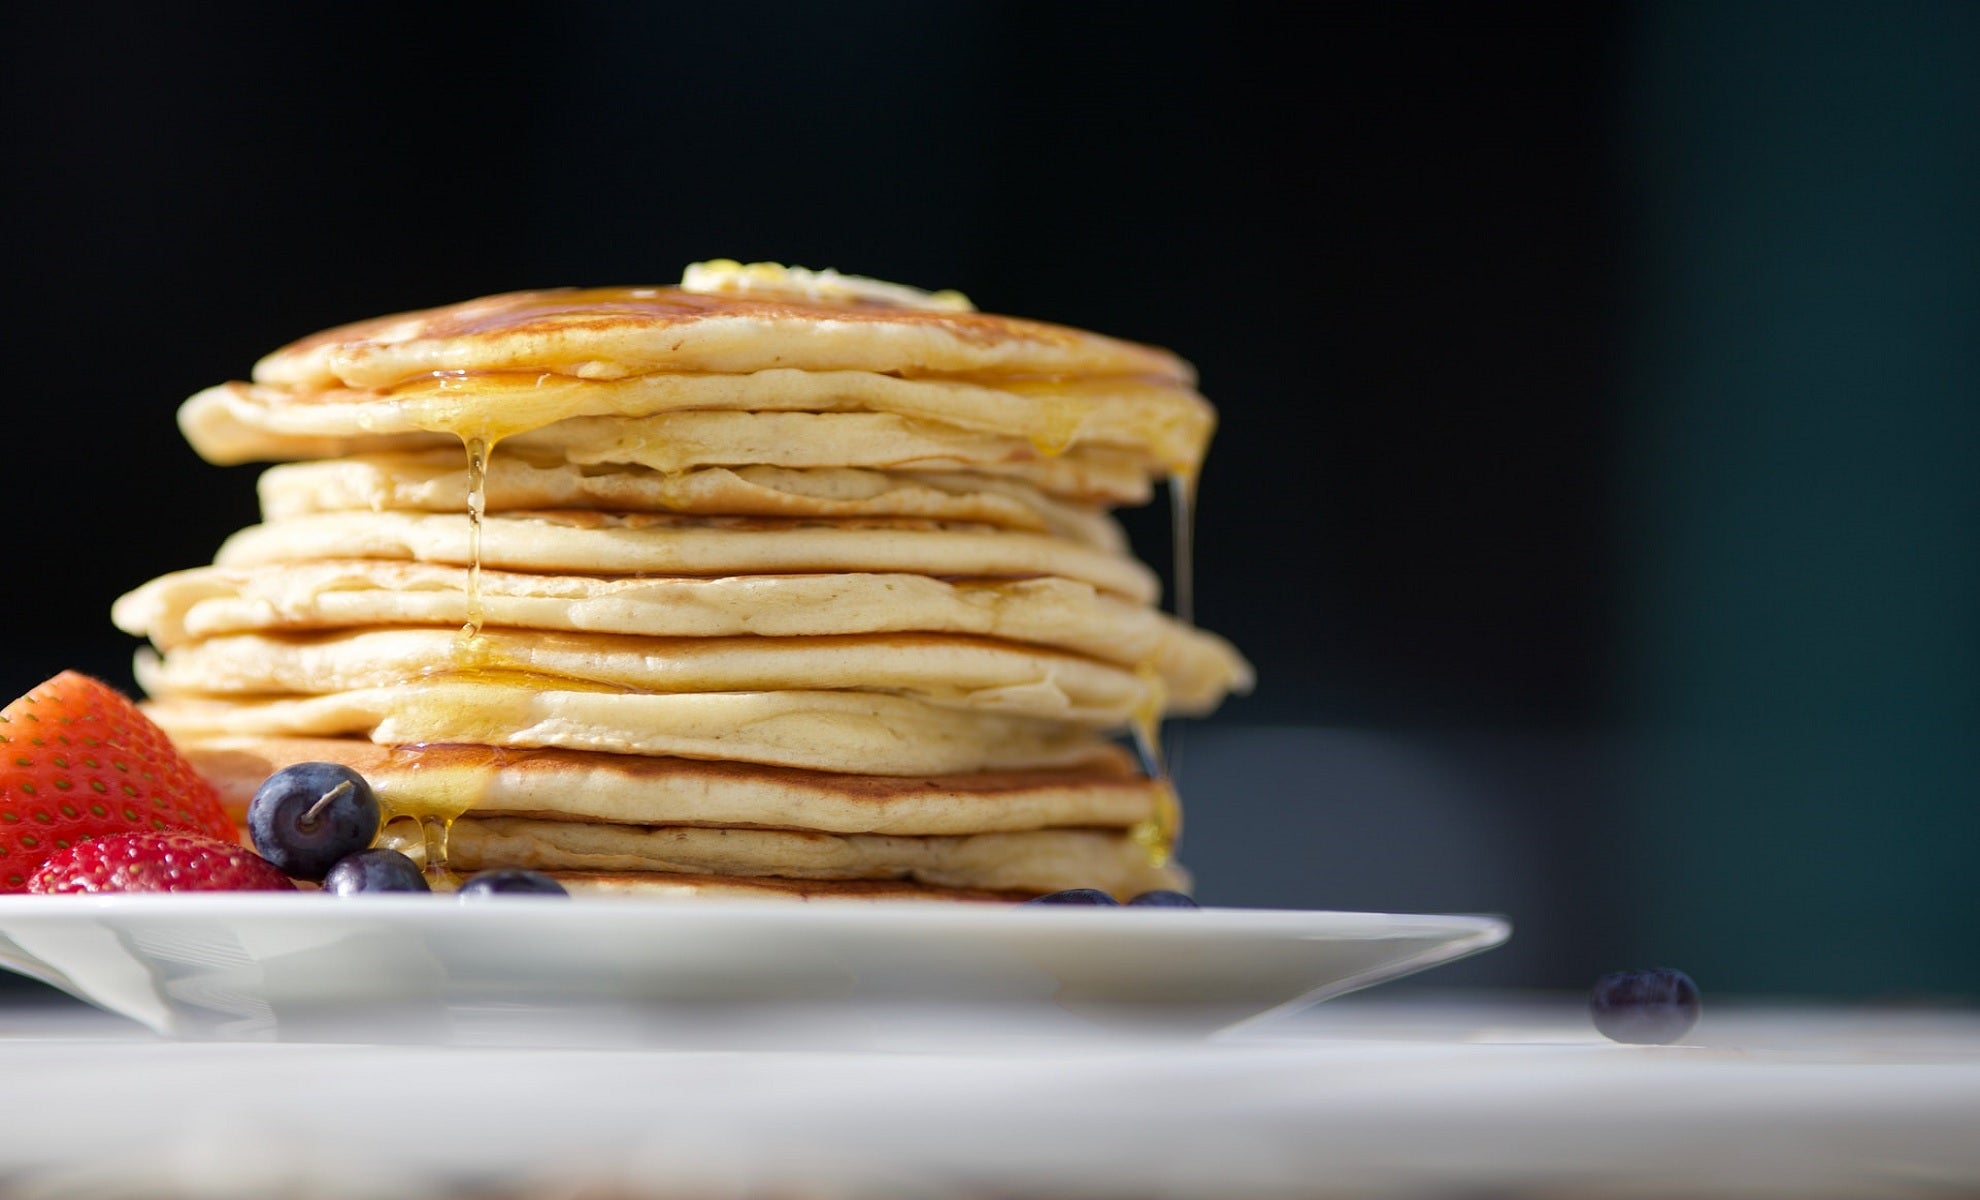 Dine Brands International’s IHOP plans 10,000 new hires in May